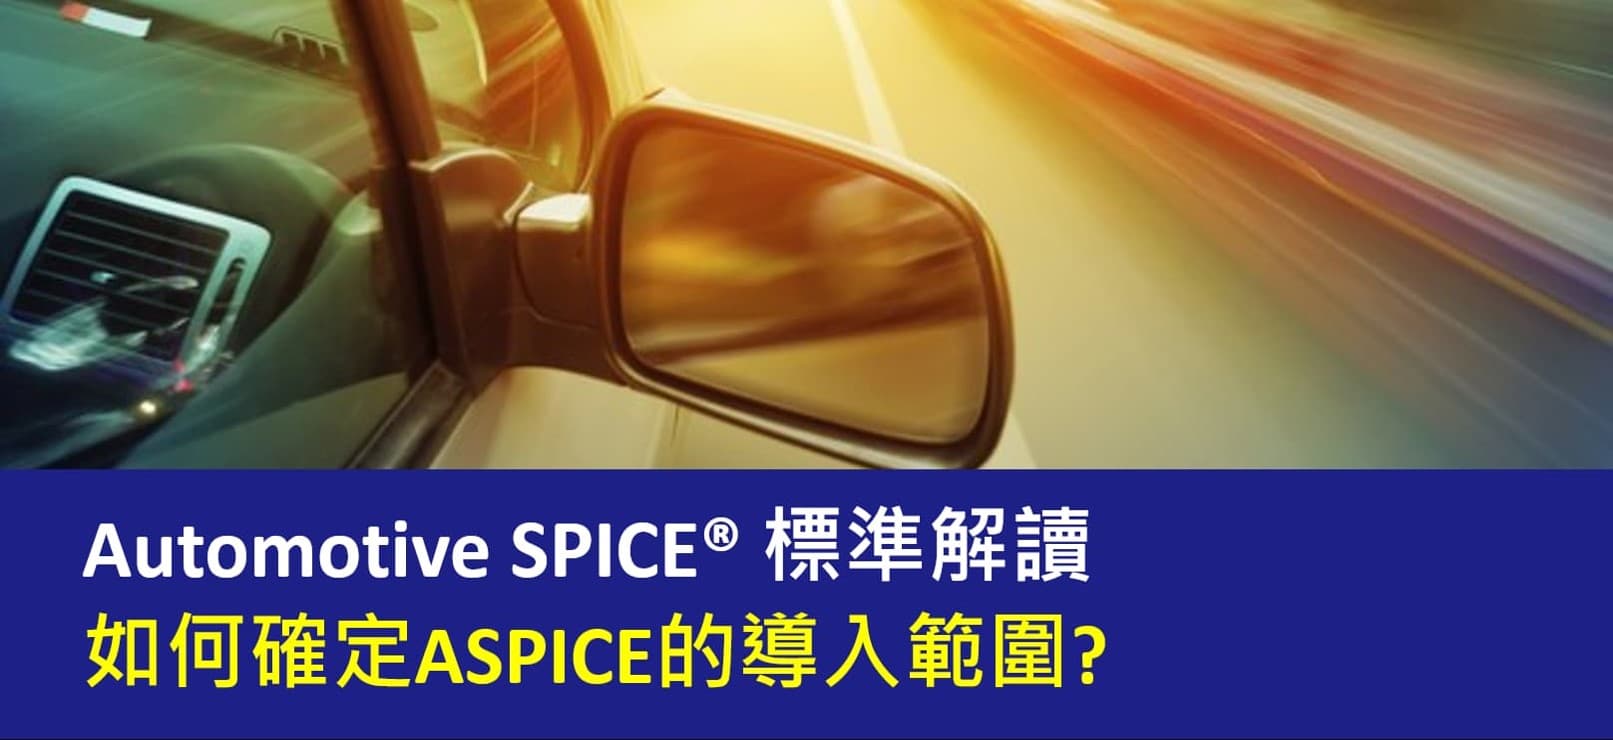 how to determine the scope of ASPICE